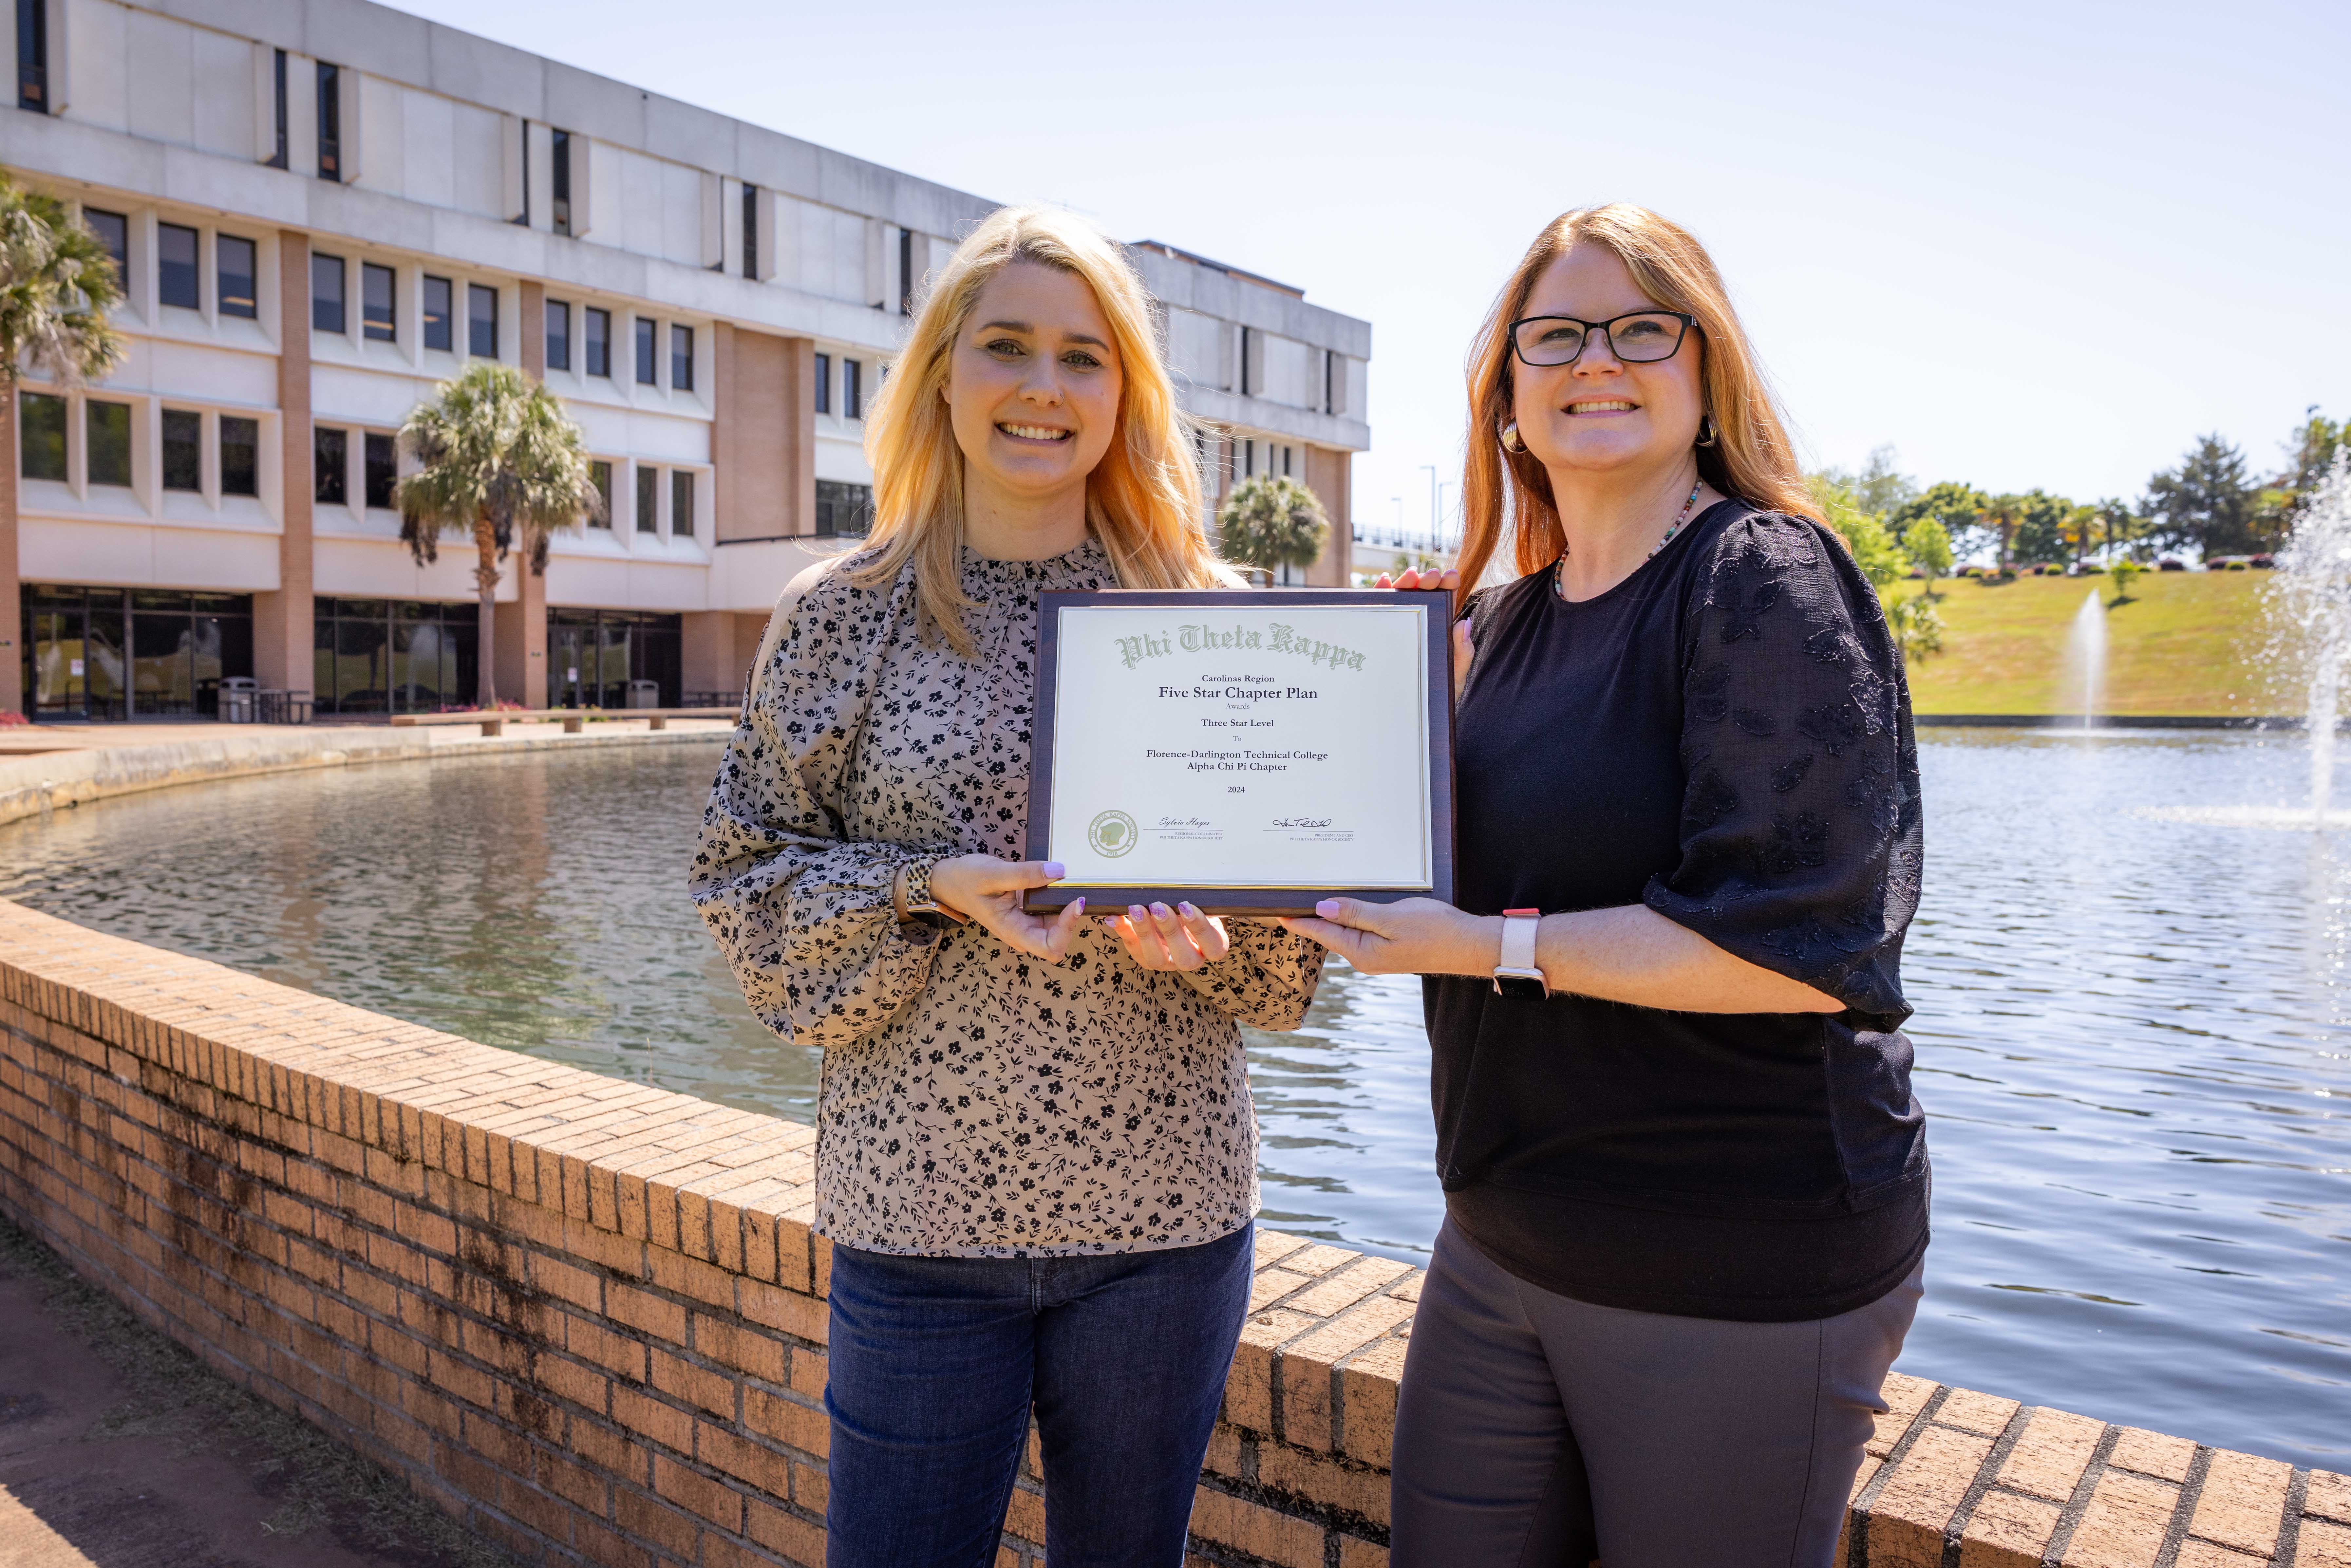 PTK Advisors Hannah Harpe and April Cudd hold a plaque for their awards in front of the FDTC 5000 building.